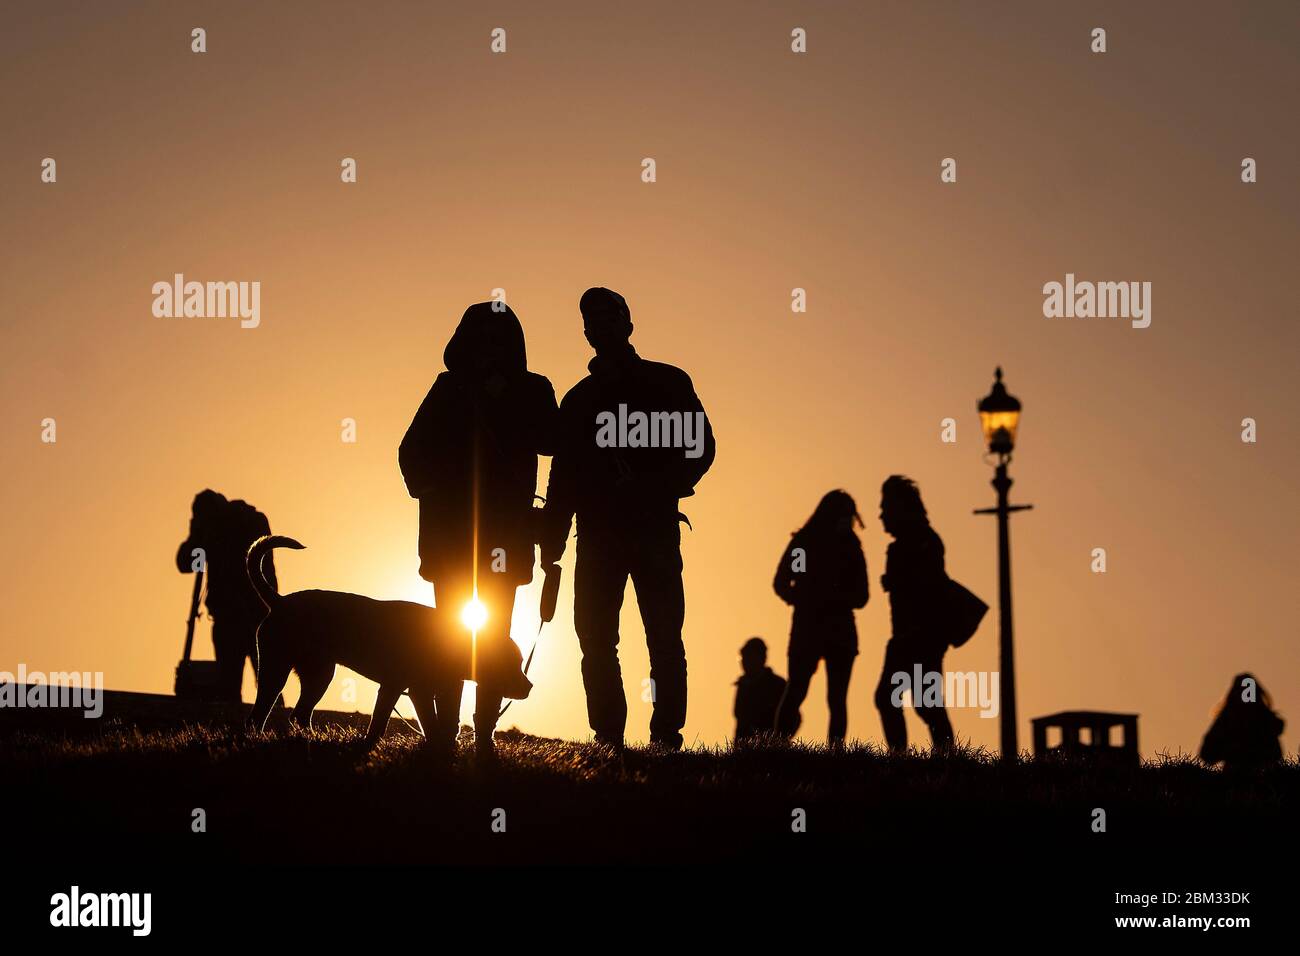 People wait for the moon to rise over Primrose Hill in central London, ahead of the final supermoon of the year, which will be visible over the UK on Thursday evening. The full moon in May is also known as the 'flower moon', signifying the flowers that bloom during the month. Stock Photo